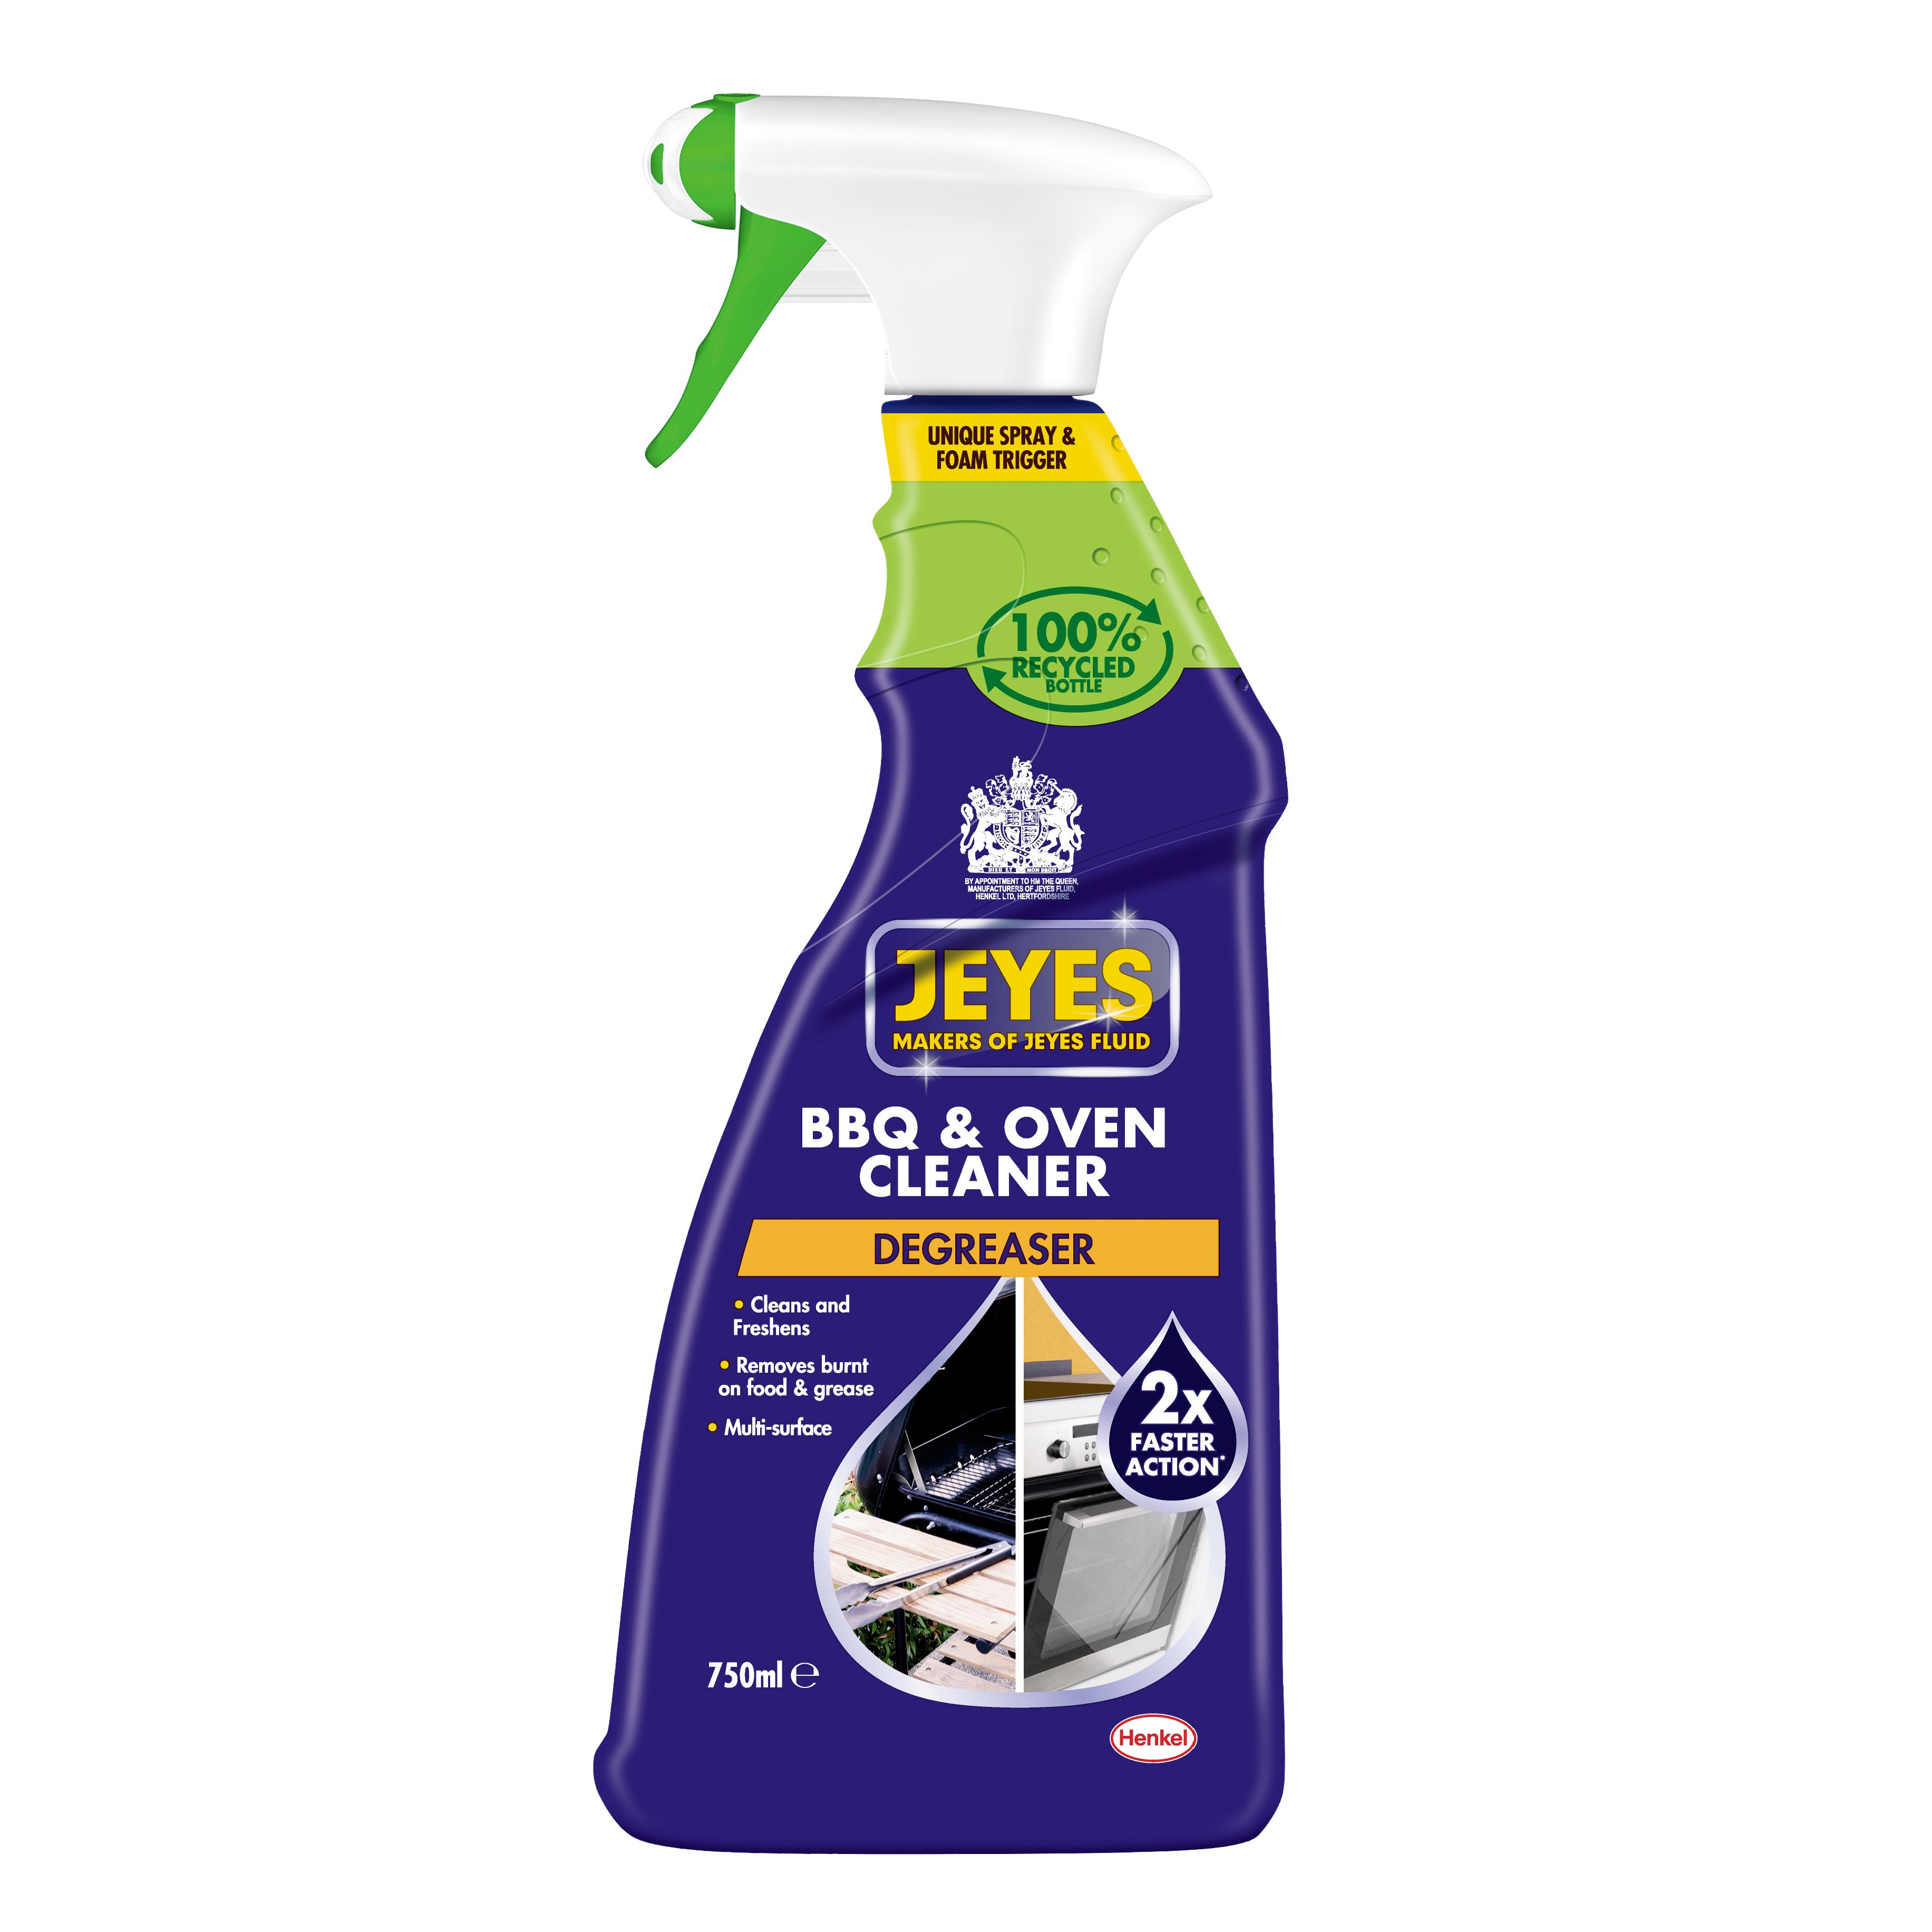 Jeyes Fluid 1-2 Spray Not concentrated Unfragranced Antibacterial BBQ, grill & oven Grill cleaning spray